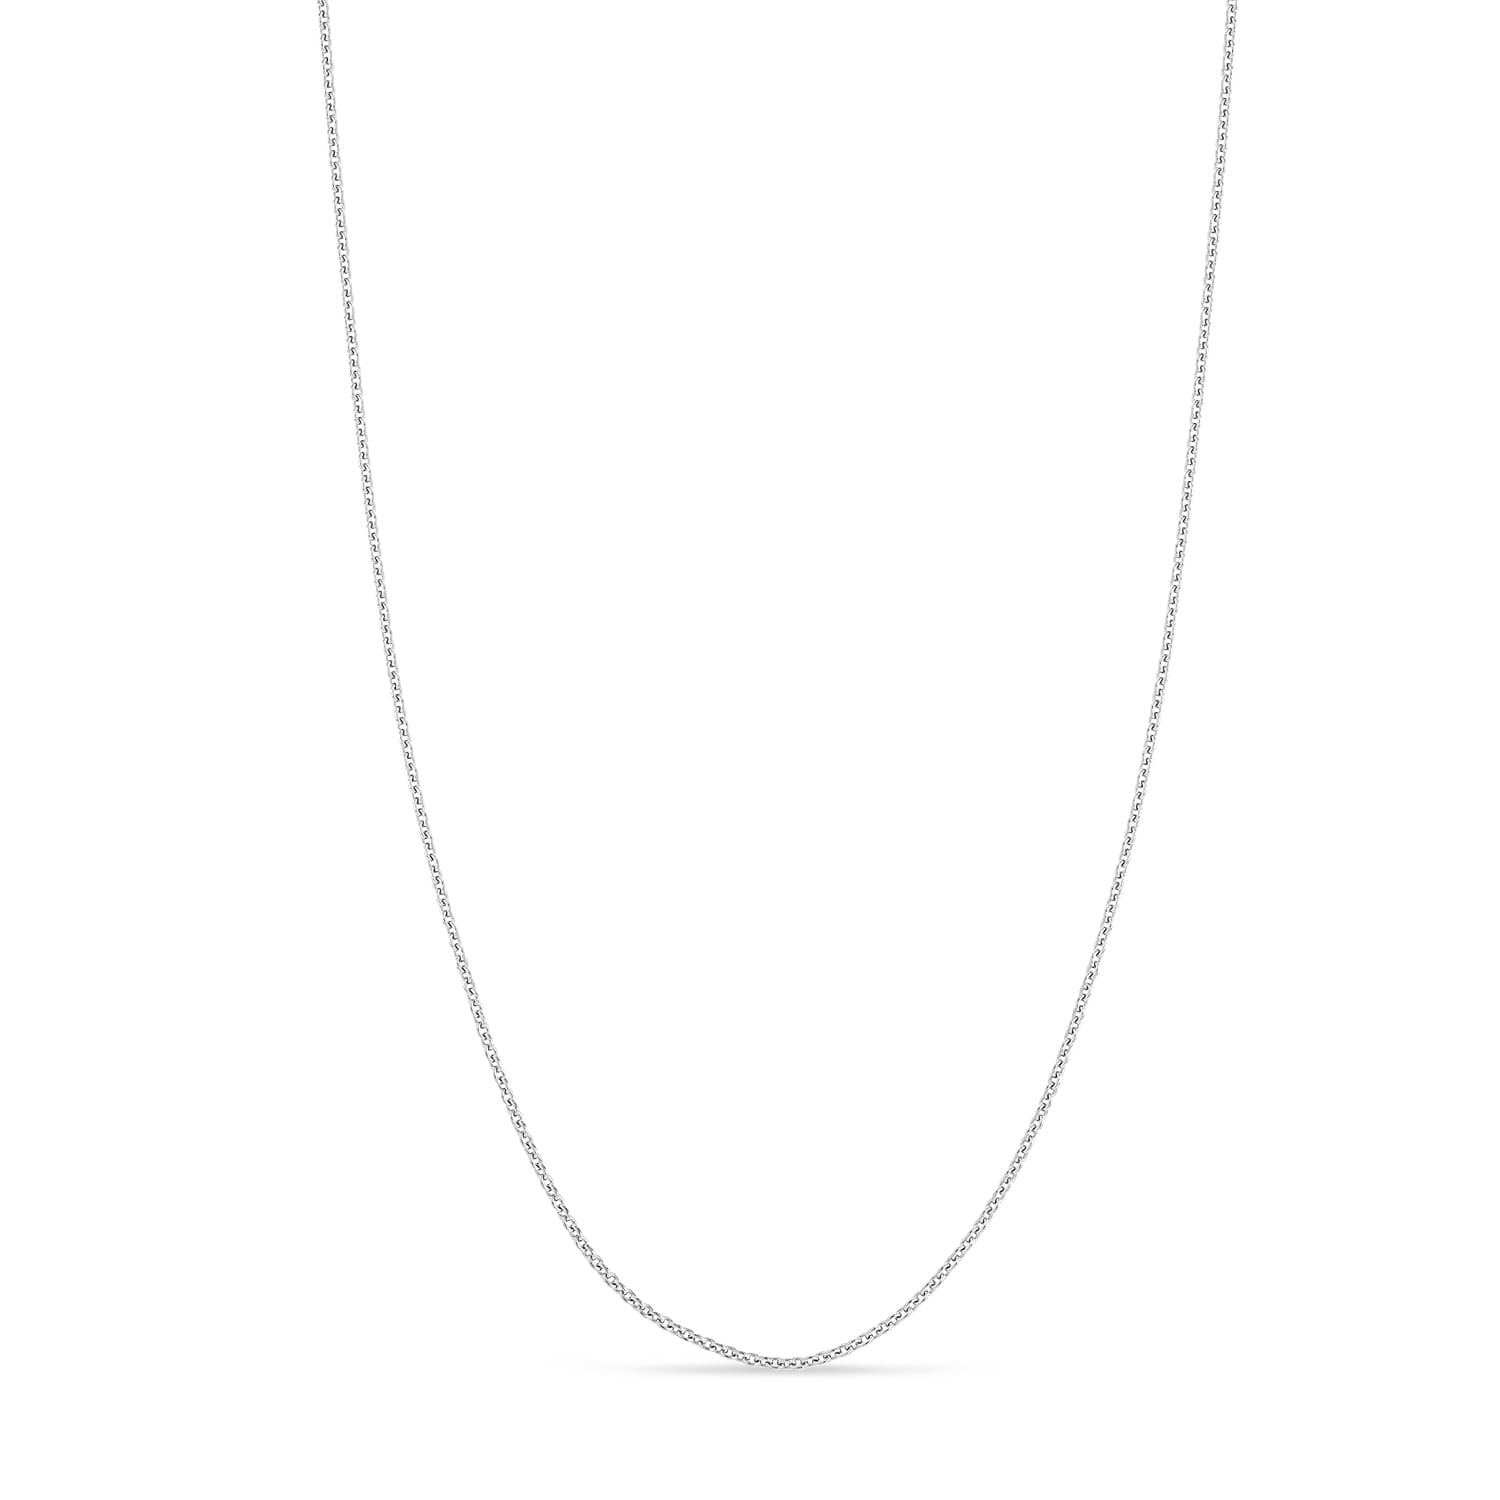 Box Chain Necklace With Lobster Lock 14k White Gold